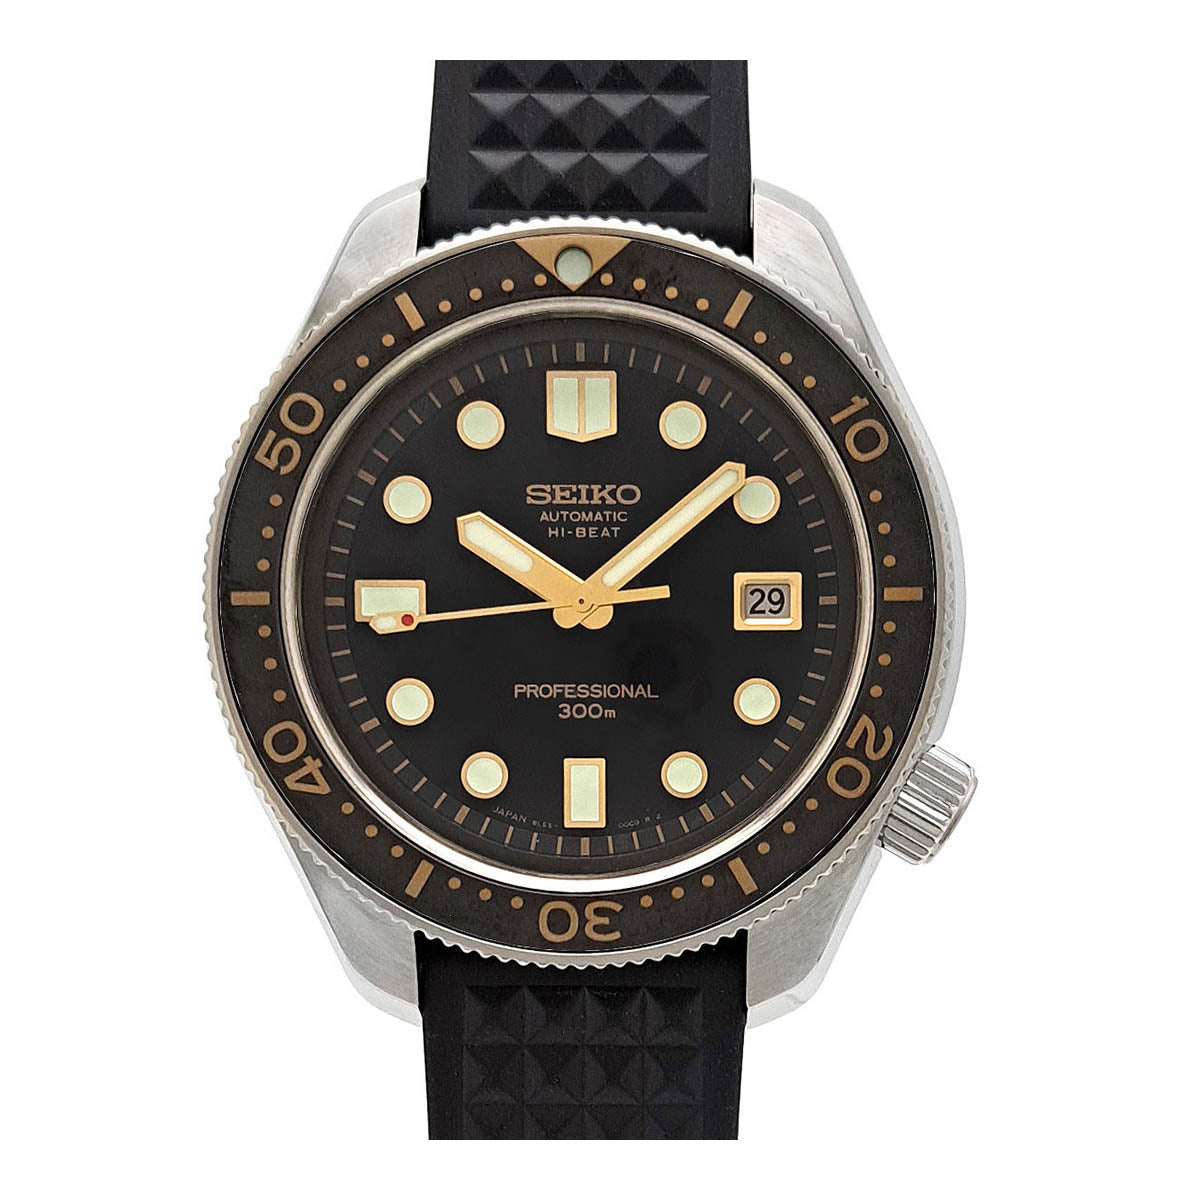 SEIKO Prospex 1968 Mechanical Divers Reprint Design SBEX007 Automatic Stainless Steel Men's Watch (Pre-Owned) SBEX007